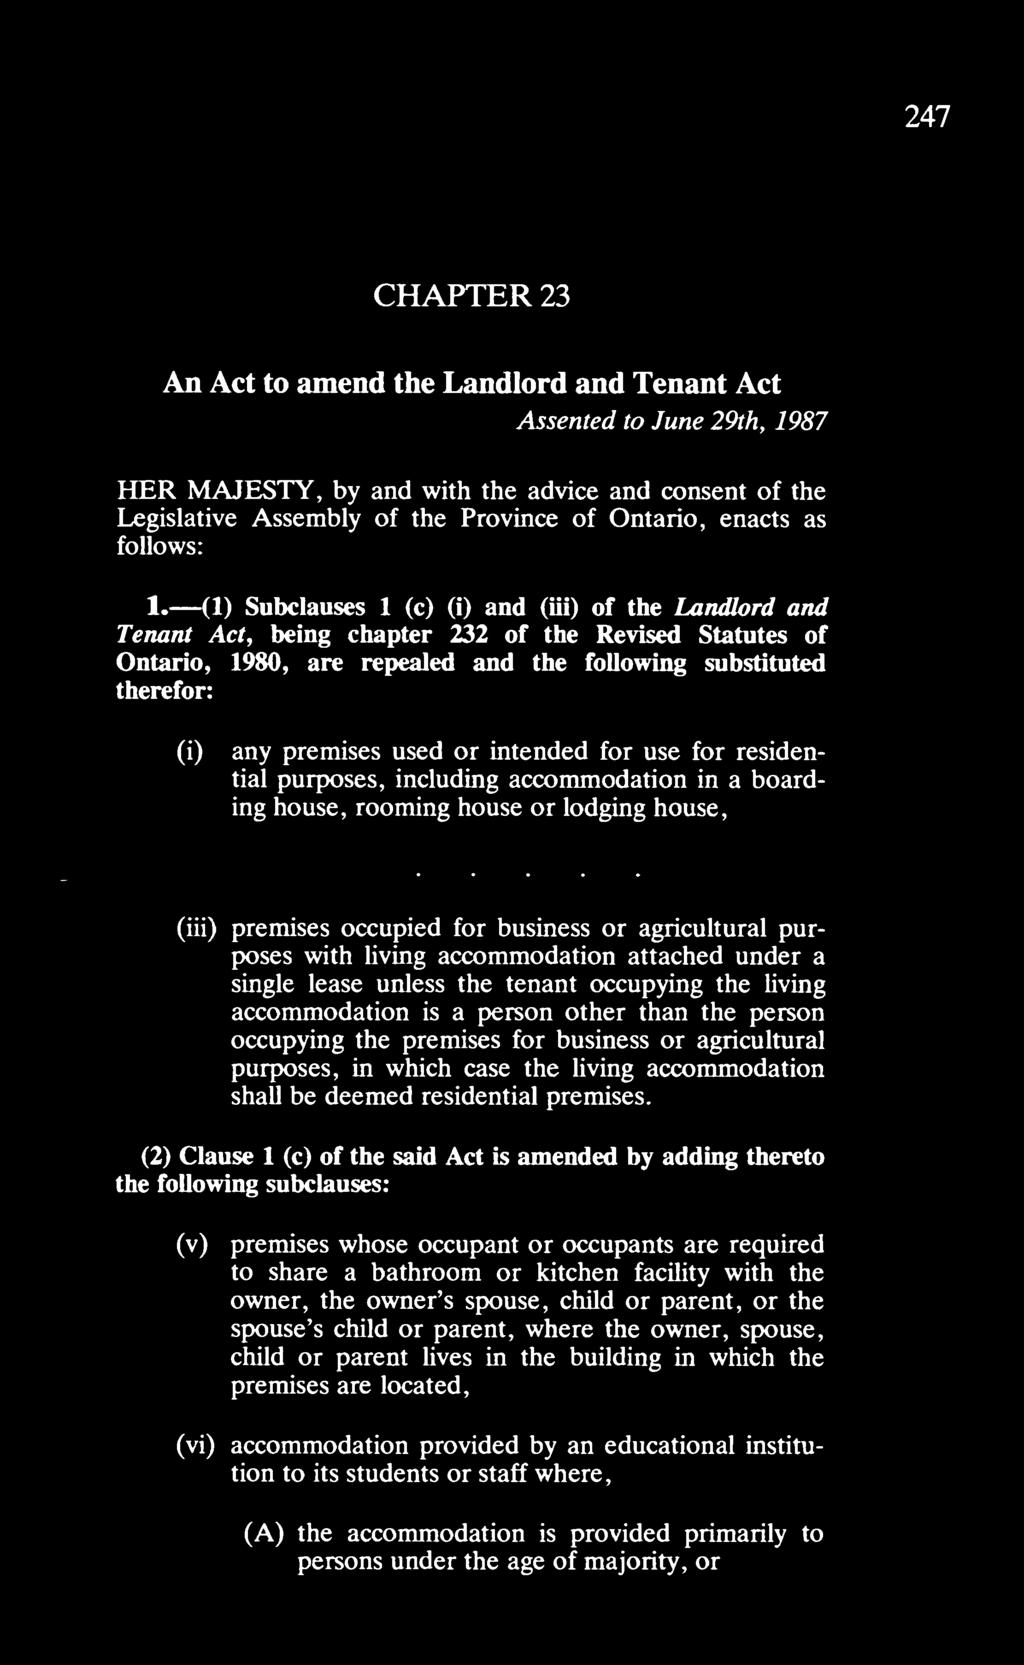 (1) Subclauses 1 (c) (i) and (iii) of the Landlord and Tenant Act, being chapter 232 of the Revised Statutes of Ontario, 1980, are repealed and the following substituted therefor: (i) any premises